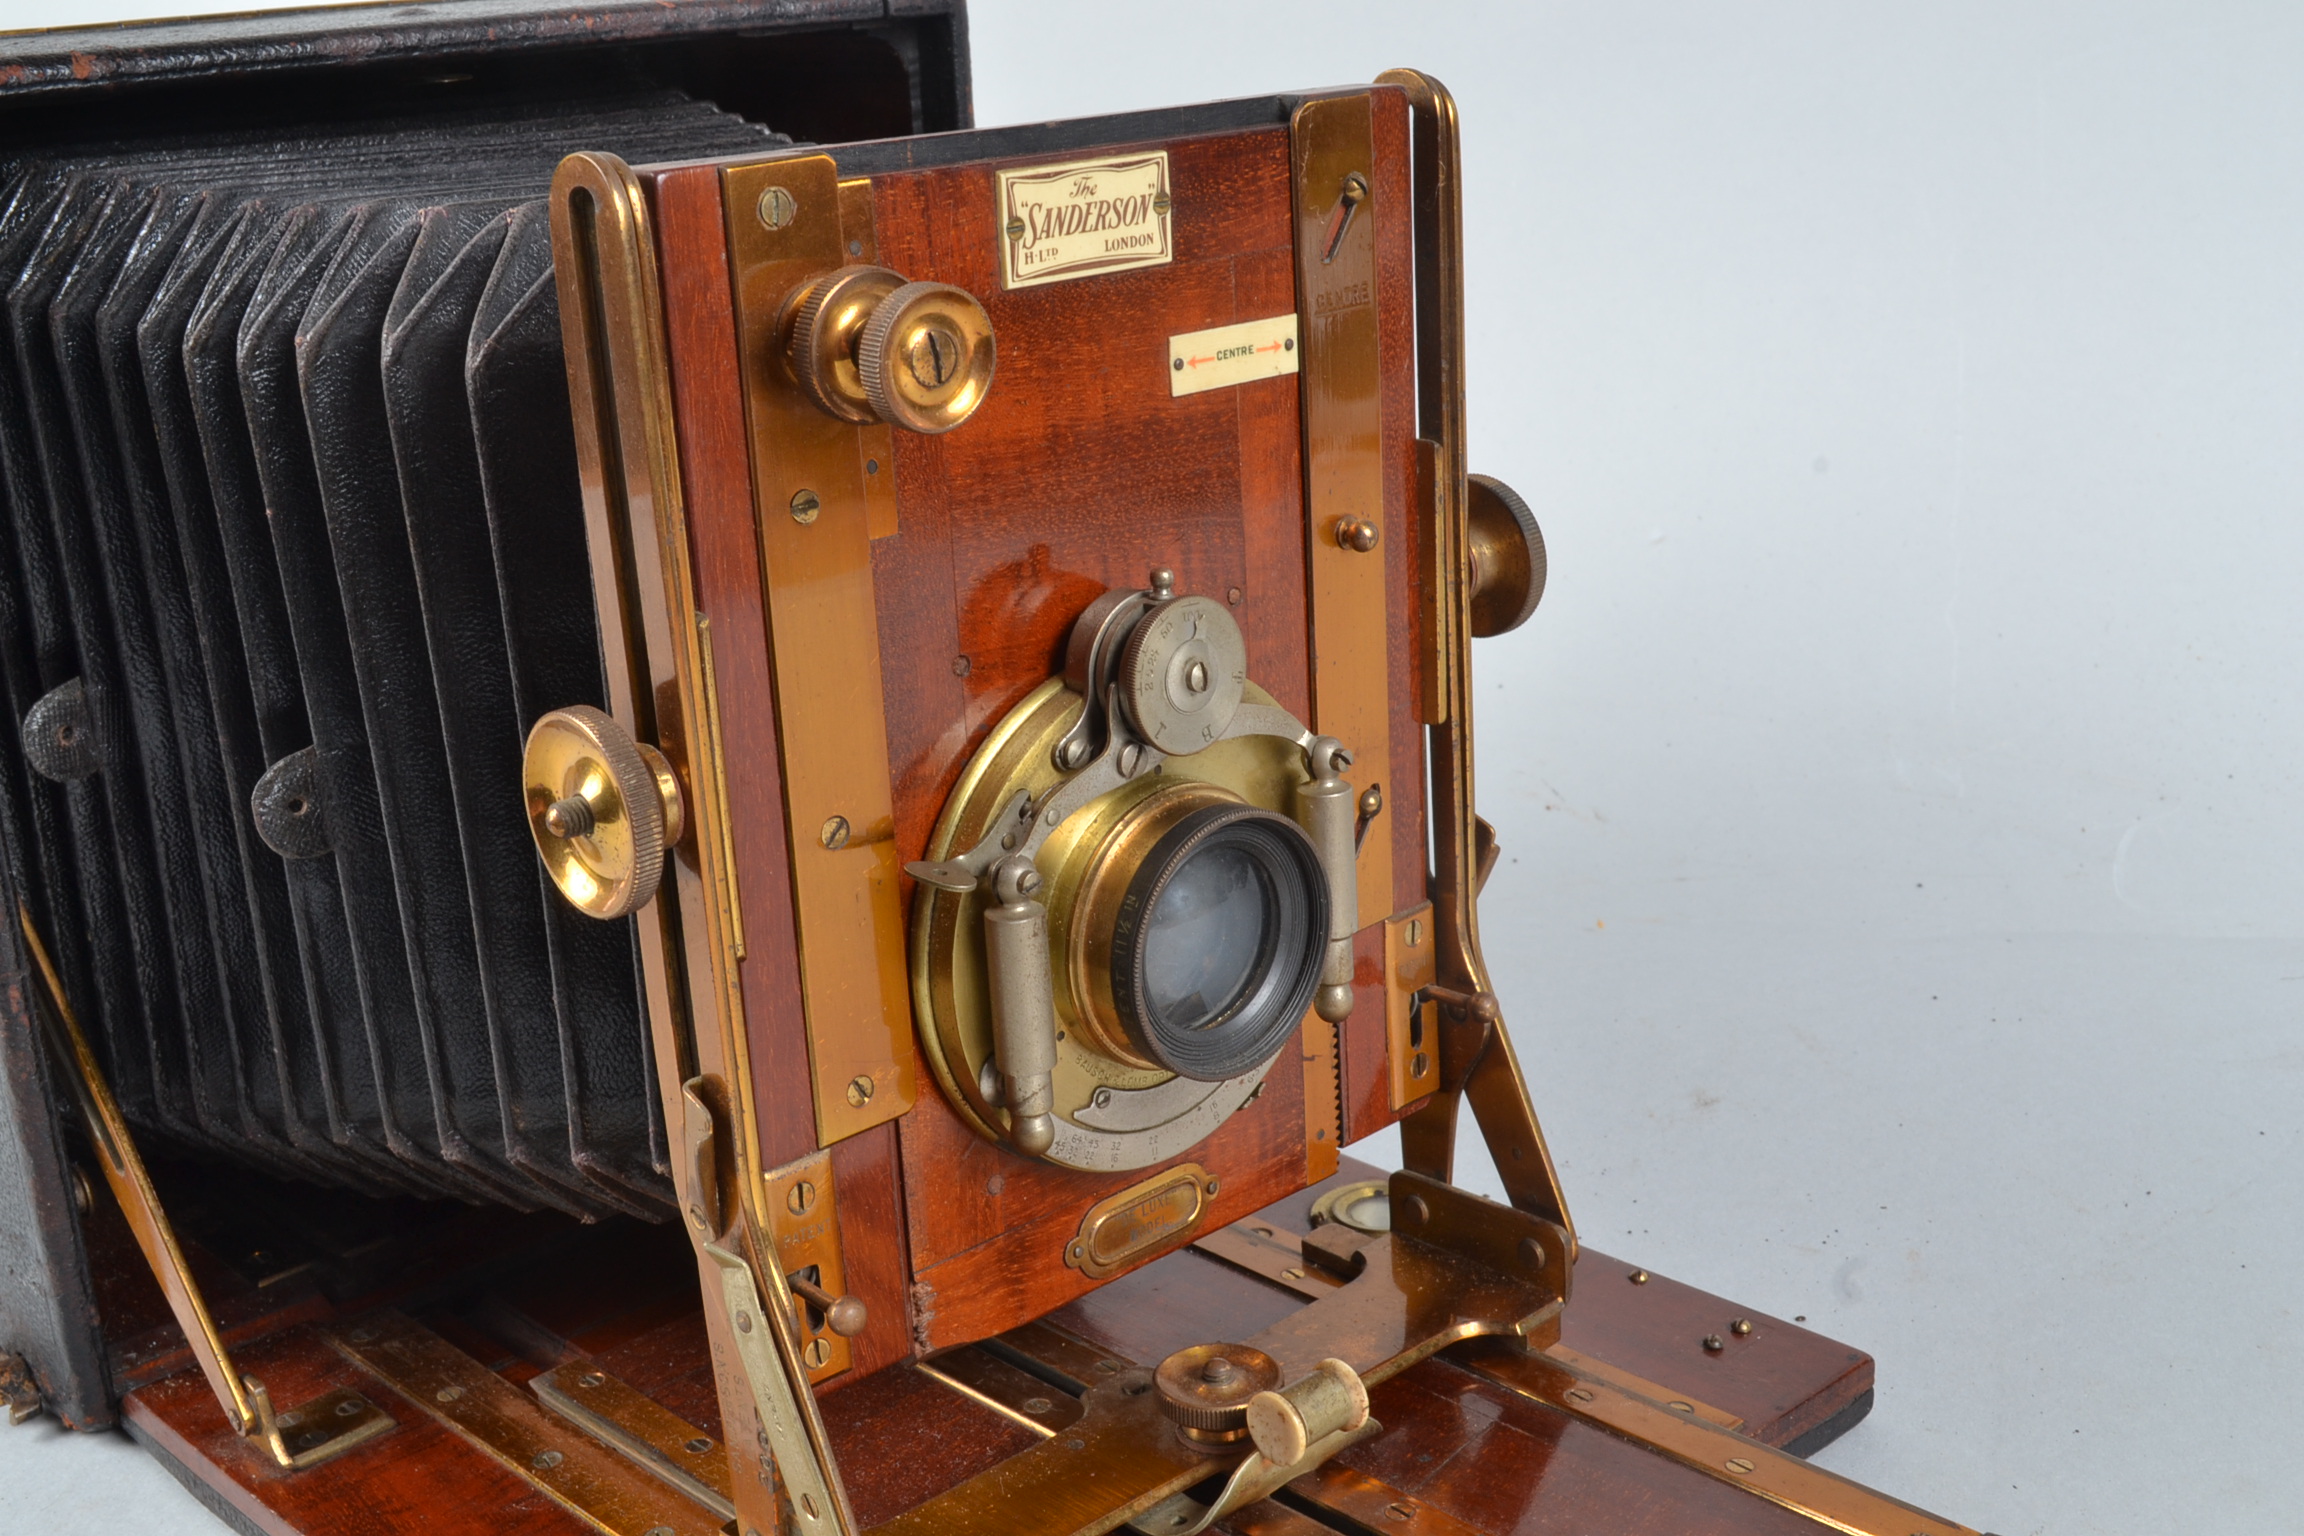 A Sanderson De Luxe Hand and Stand Camera, 6½ x 4¾in, made by Houghtons Ltd, serial no 20035, - Image 4 of 5